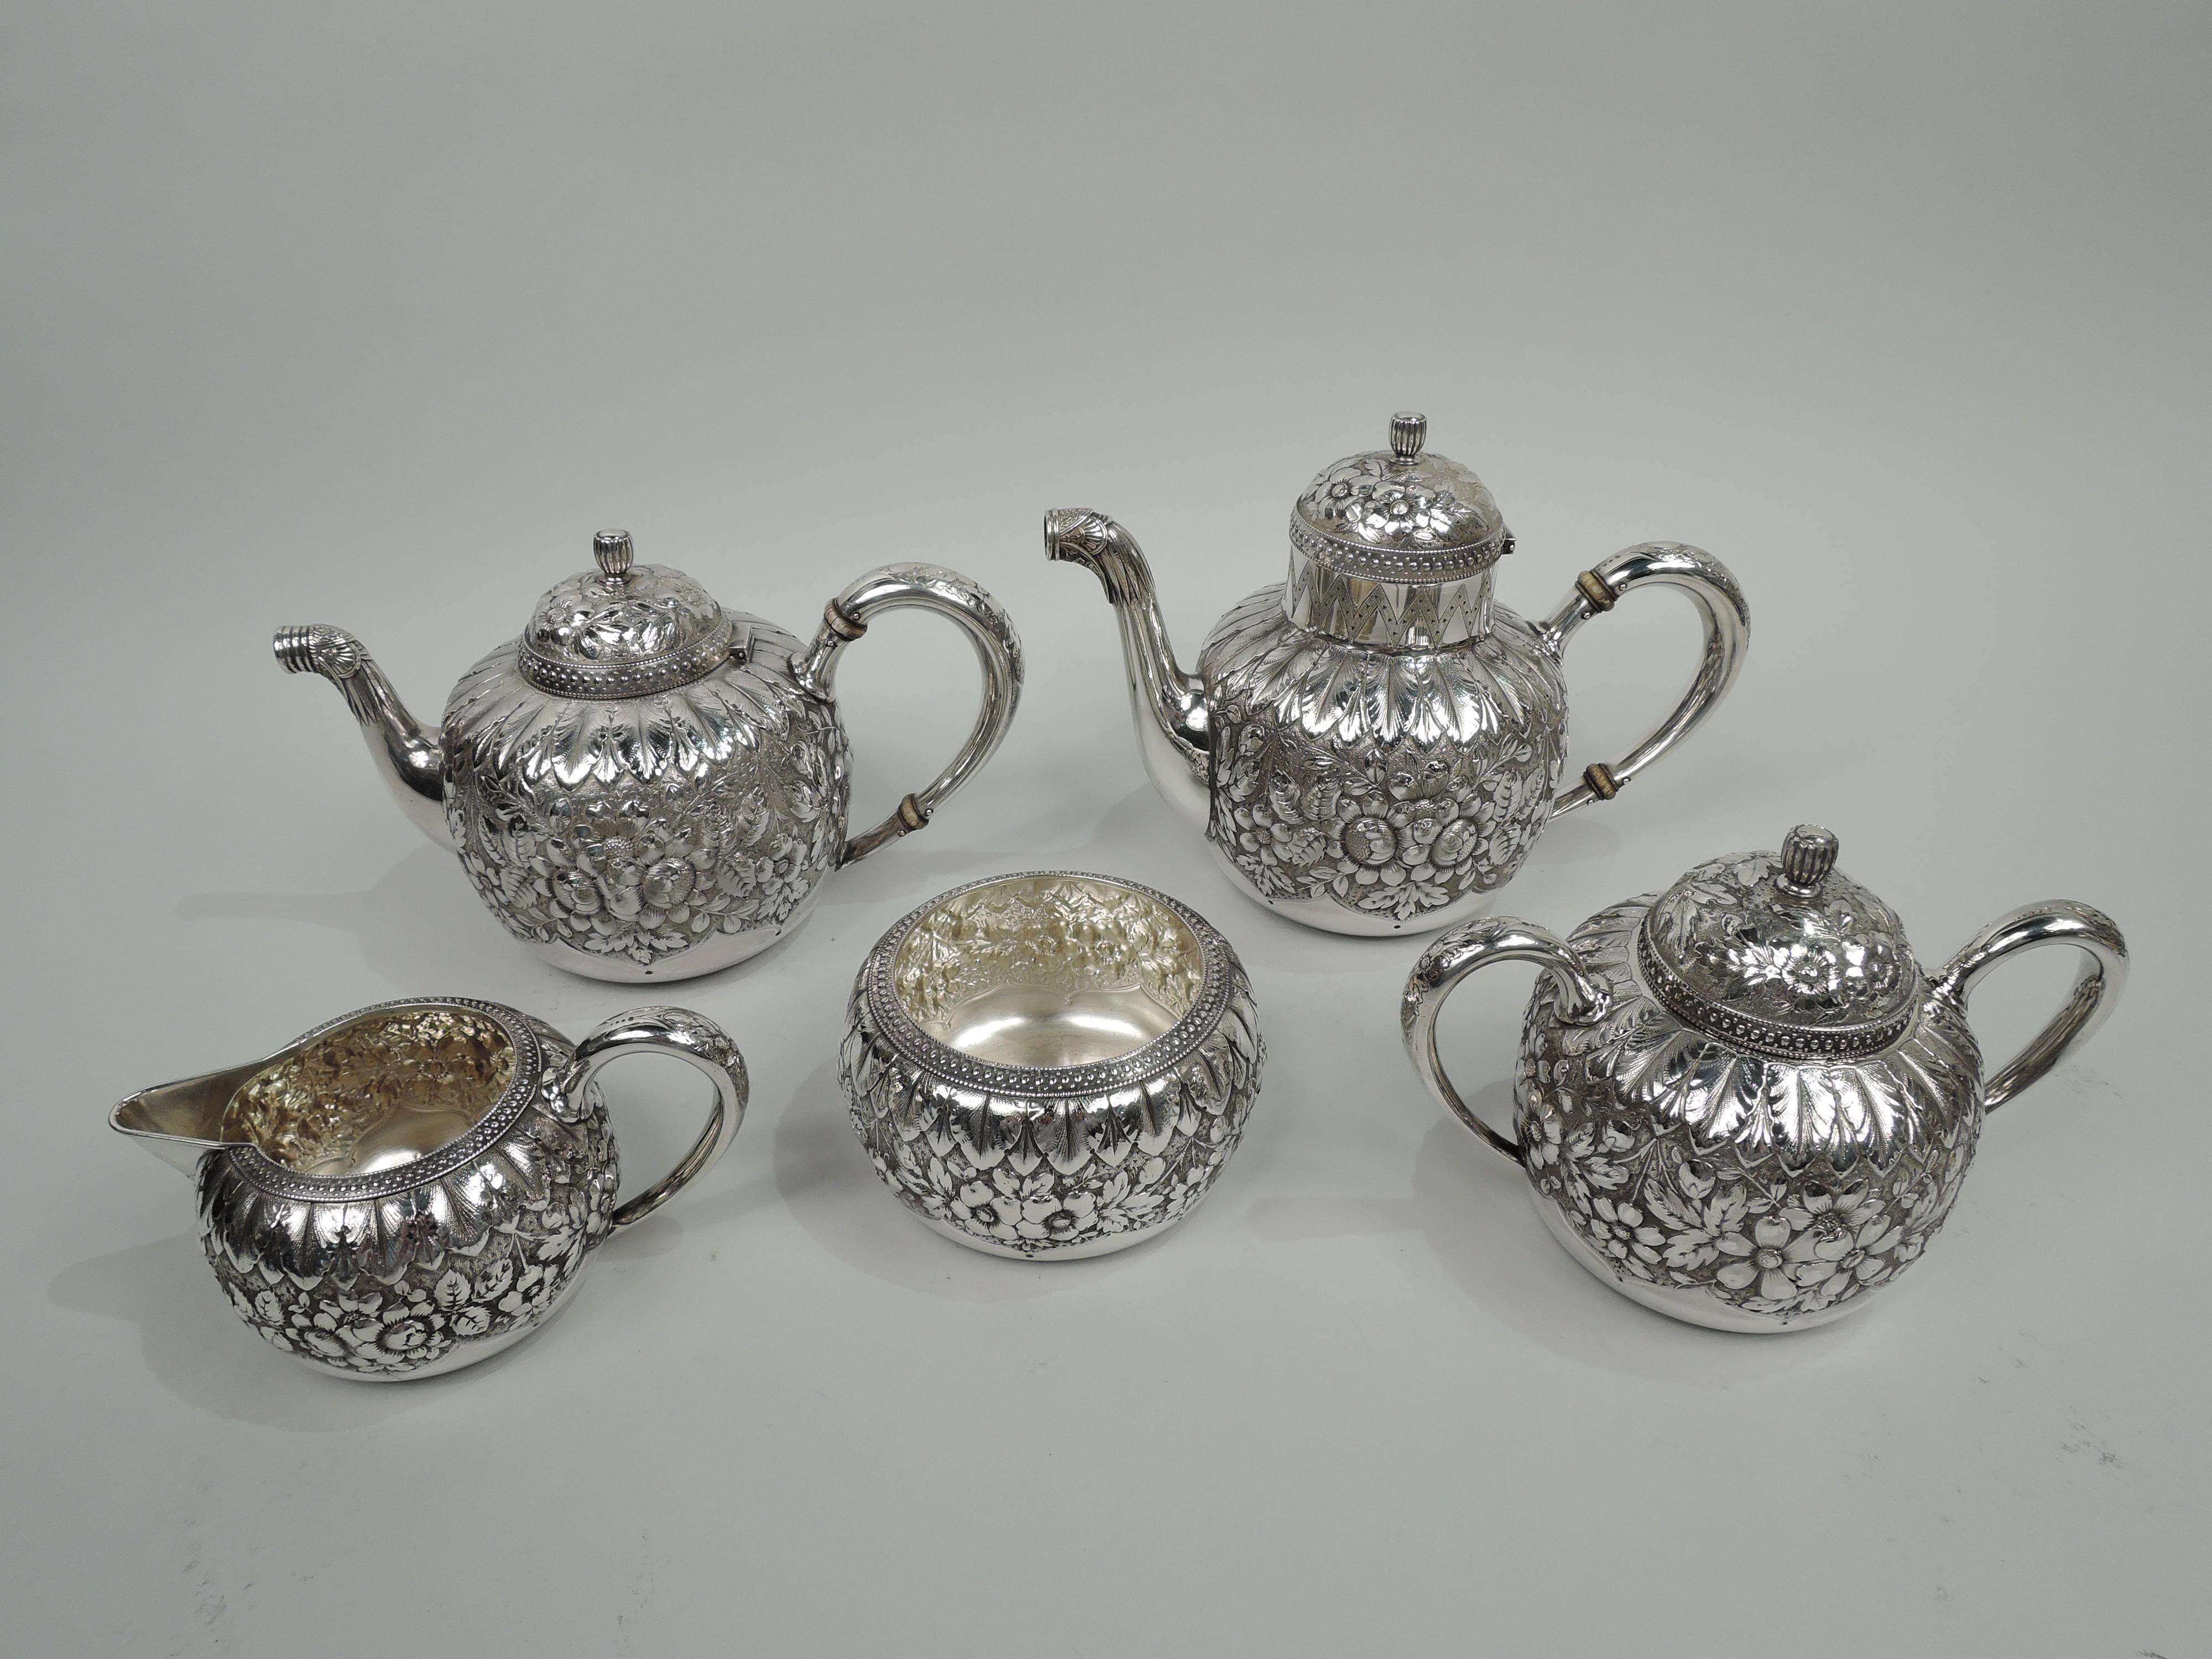 Victorian Classical sterling silver coffee and tea set. Made by Gorham in Providence in 1885. This set comprises 6 pieces: Coffeepot, teapot, creamer, sugar, and waste bowl. Each: Round body with floral repousse between chased and engraved